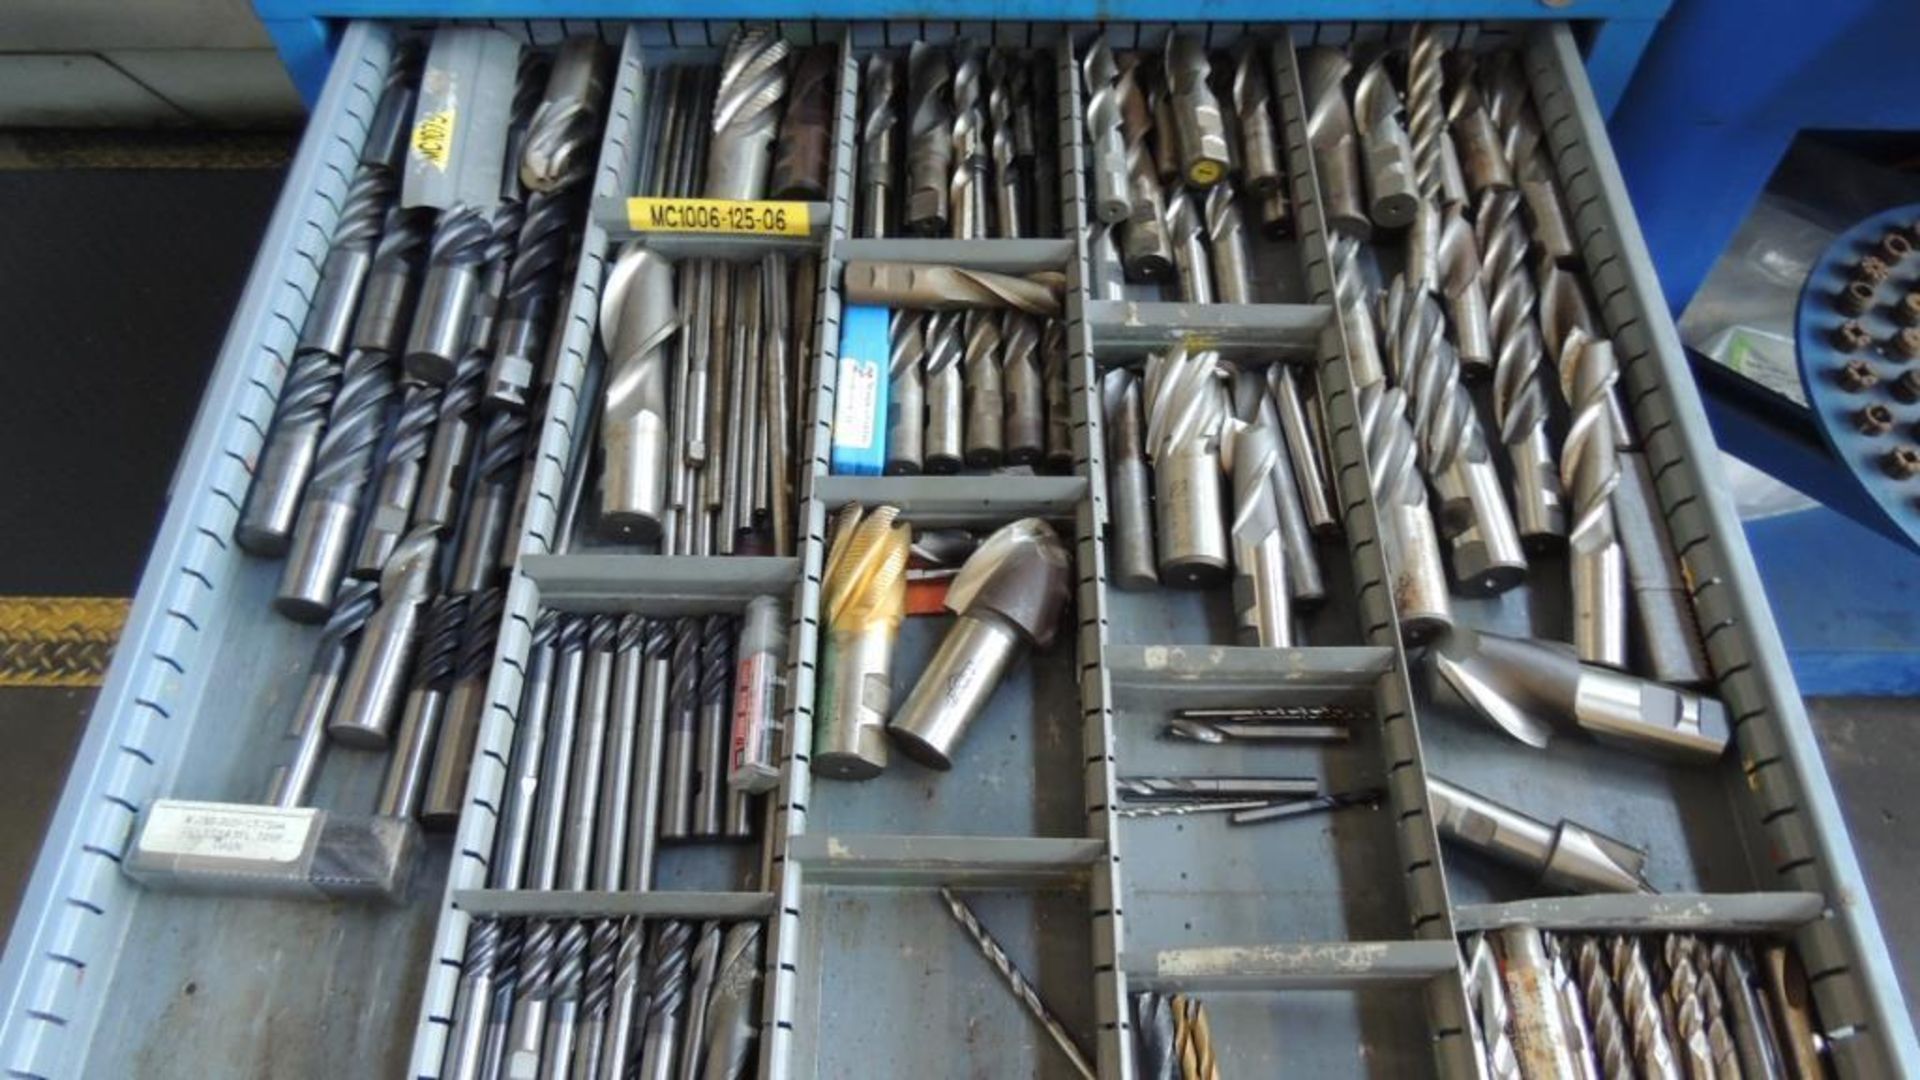 Tool Supply Cabinet With Contents Of Tooling - Image 15 of 29